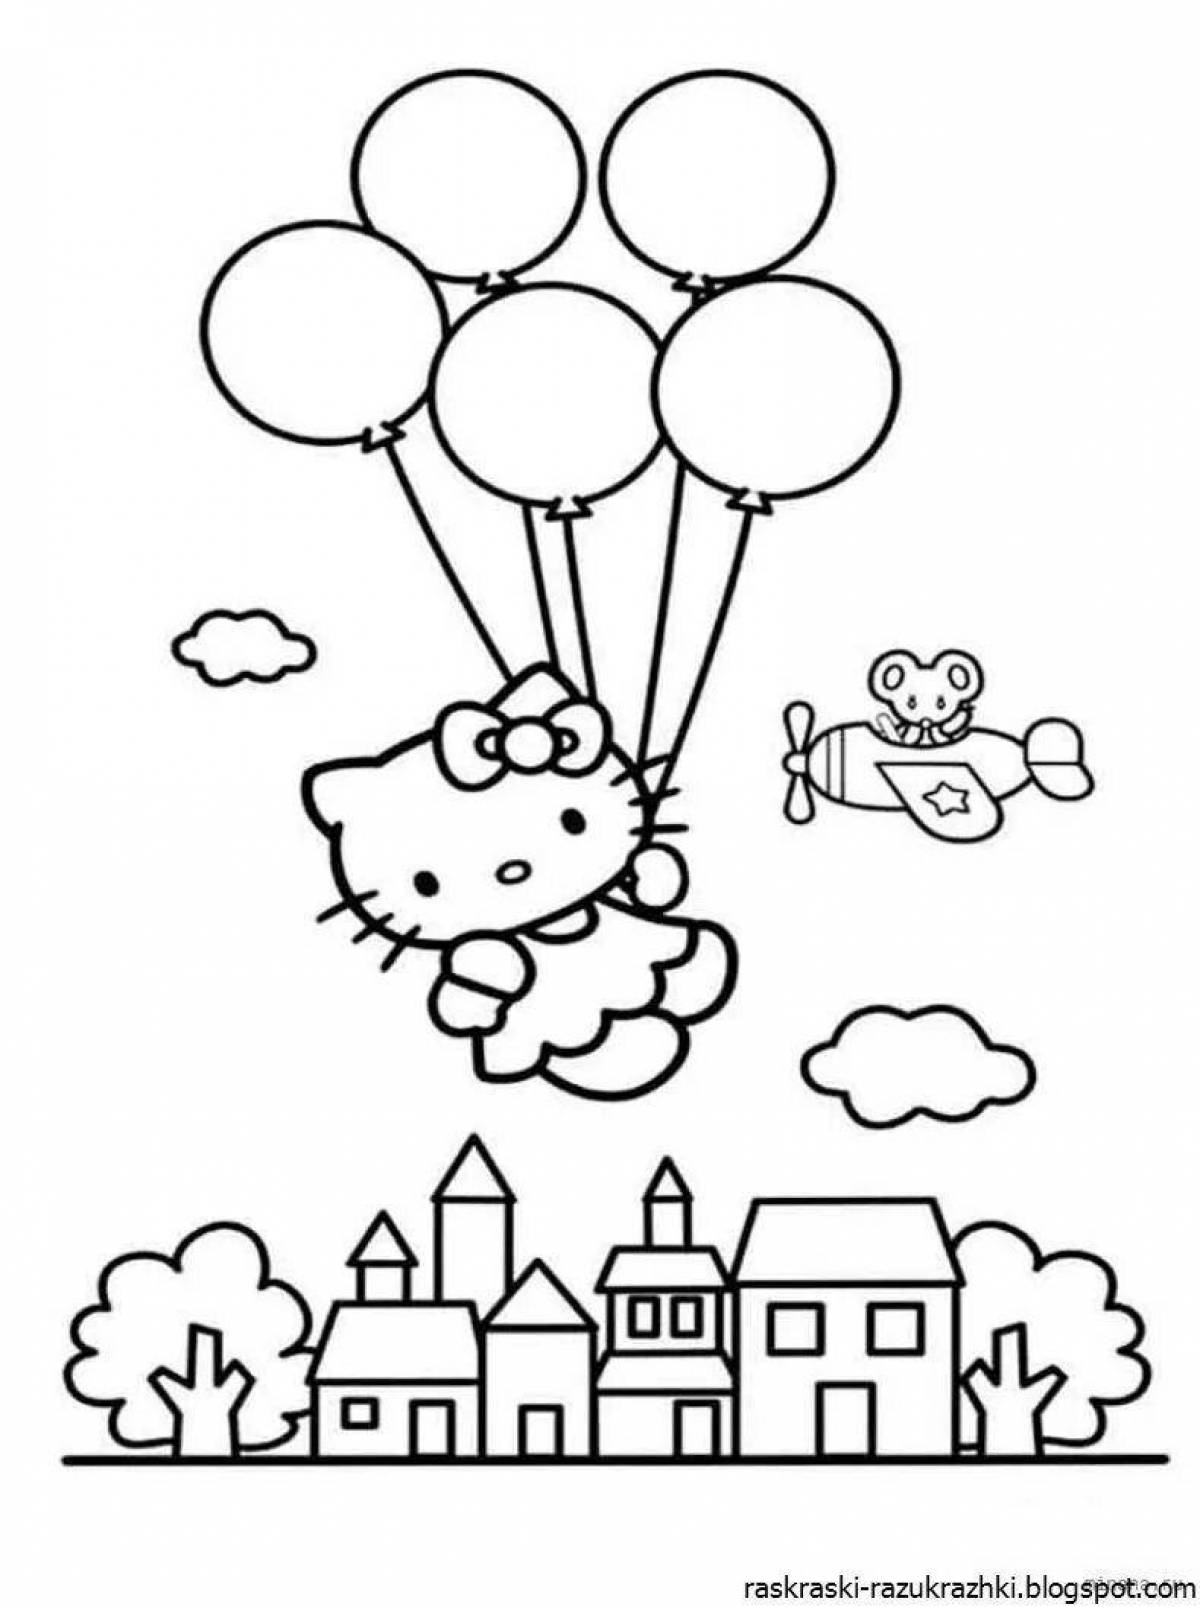 Coloring book joyful ball for children 3-4 years old